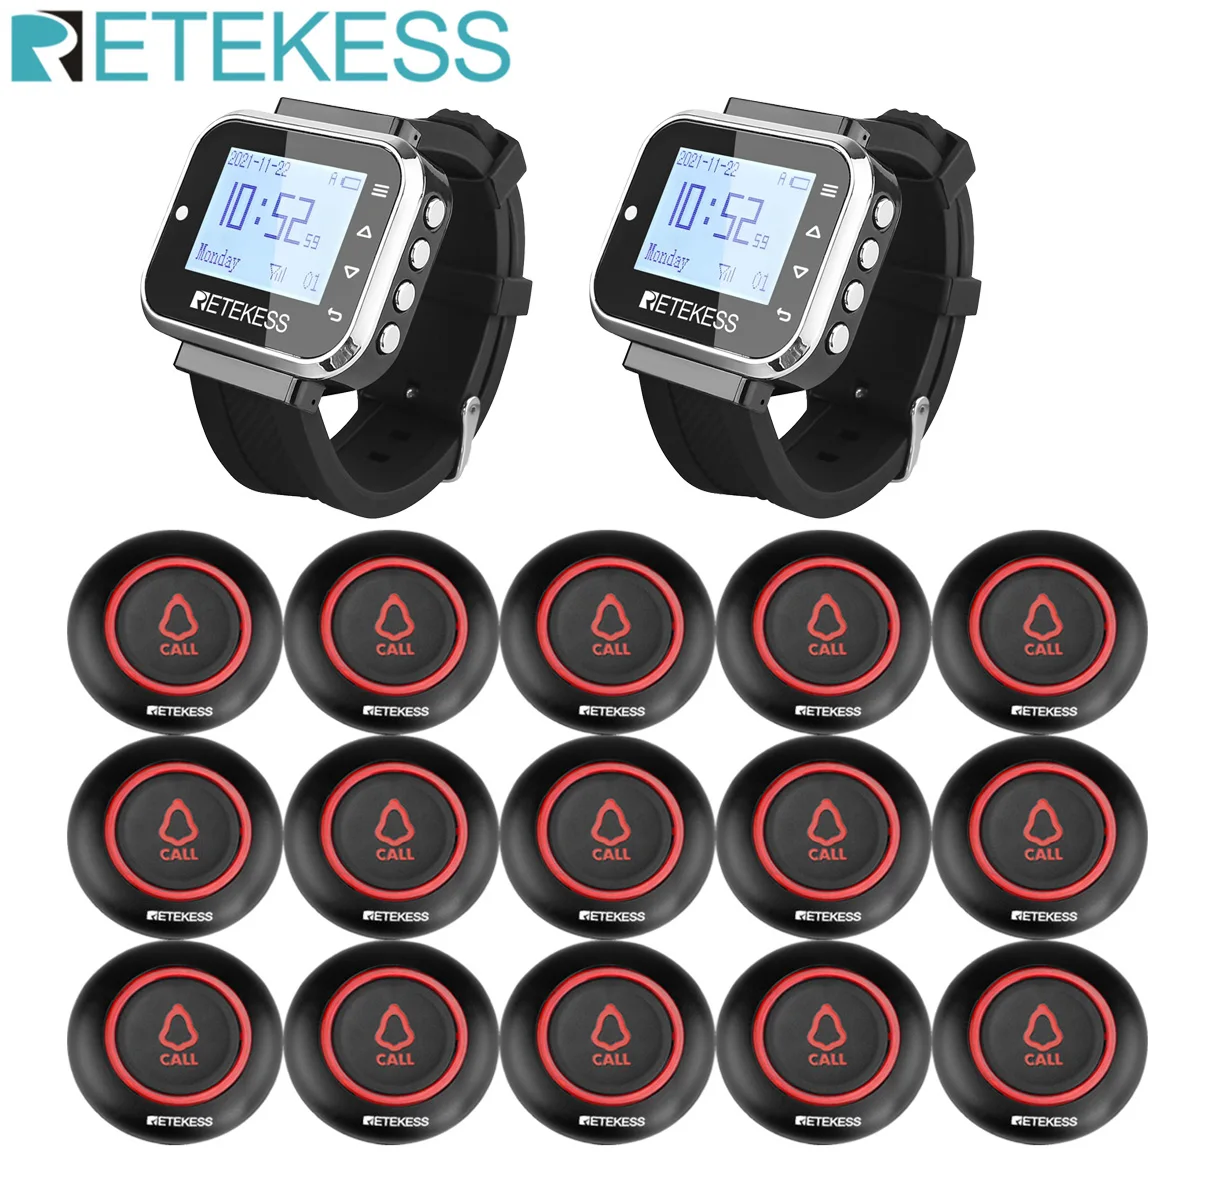 Retekess Restaurant Pager Wireless Calling System 7 Languages 2 TD110 Watch Receiver + 15 TD019 Button For Hookah Bar Coffee